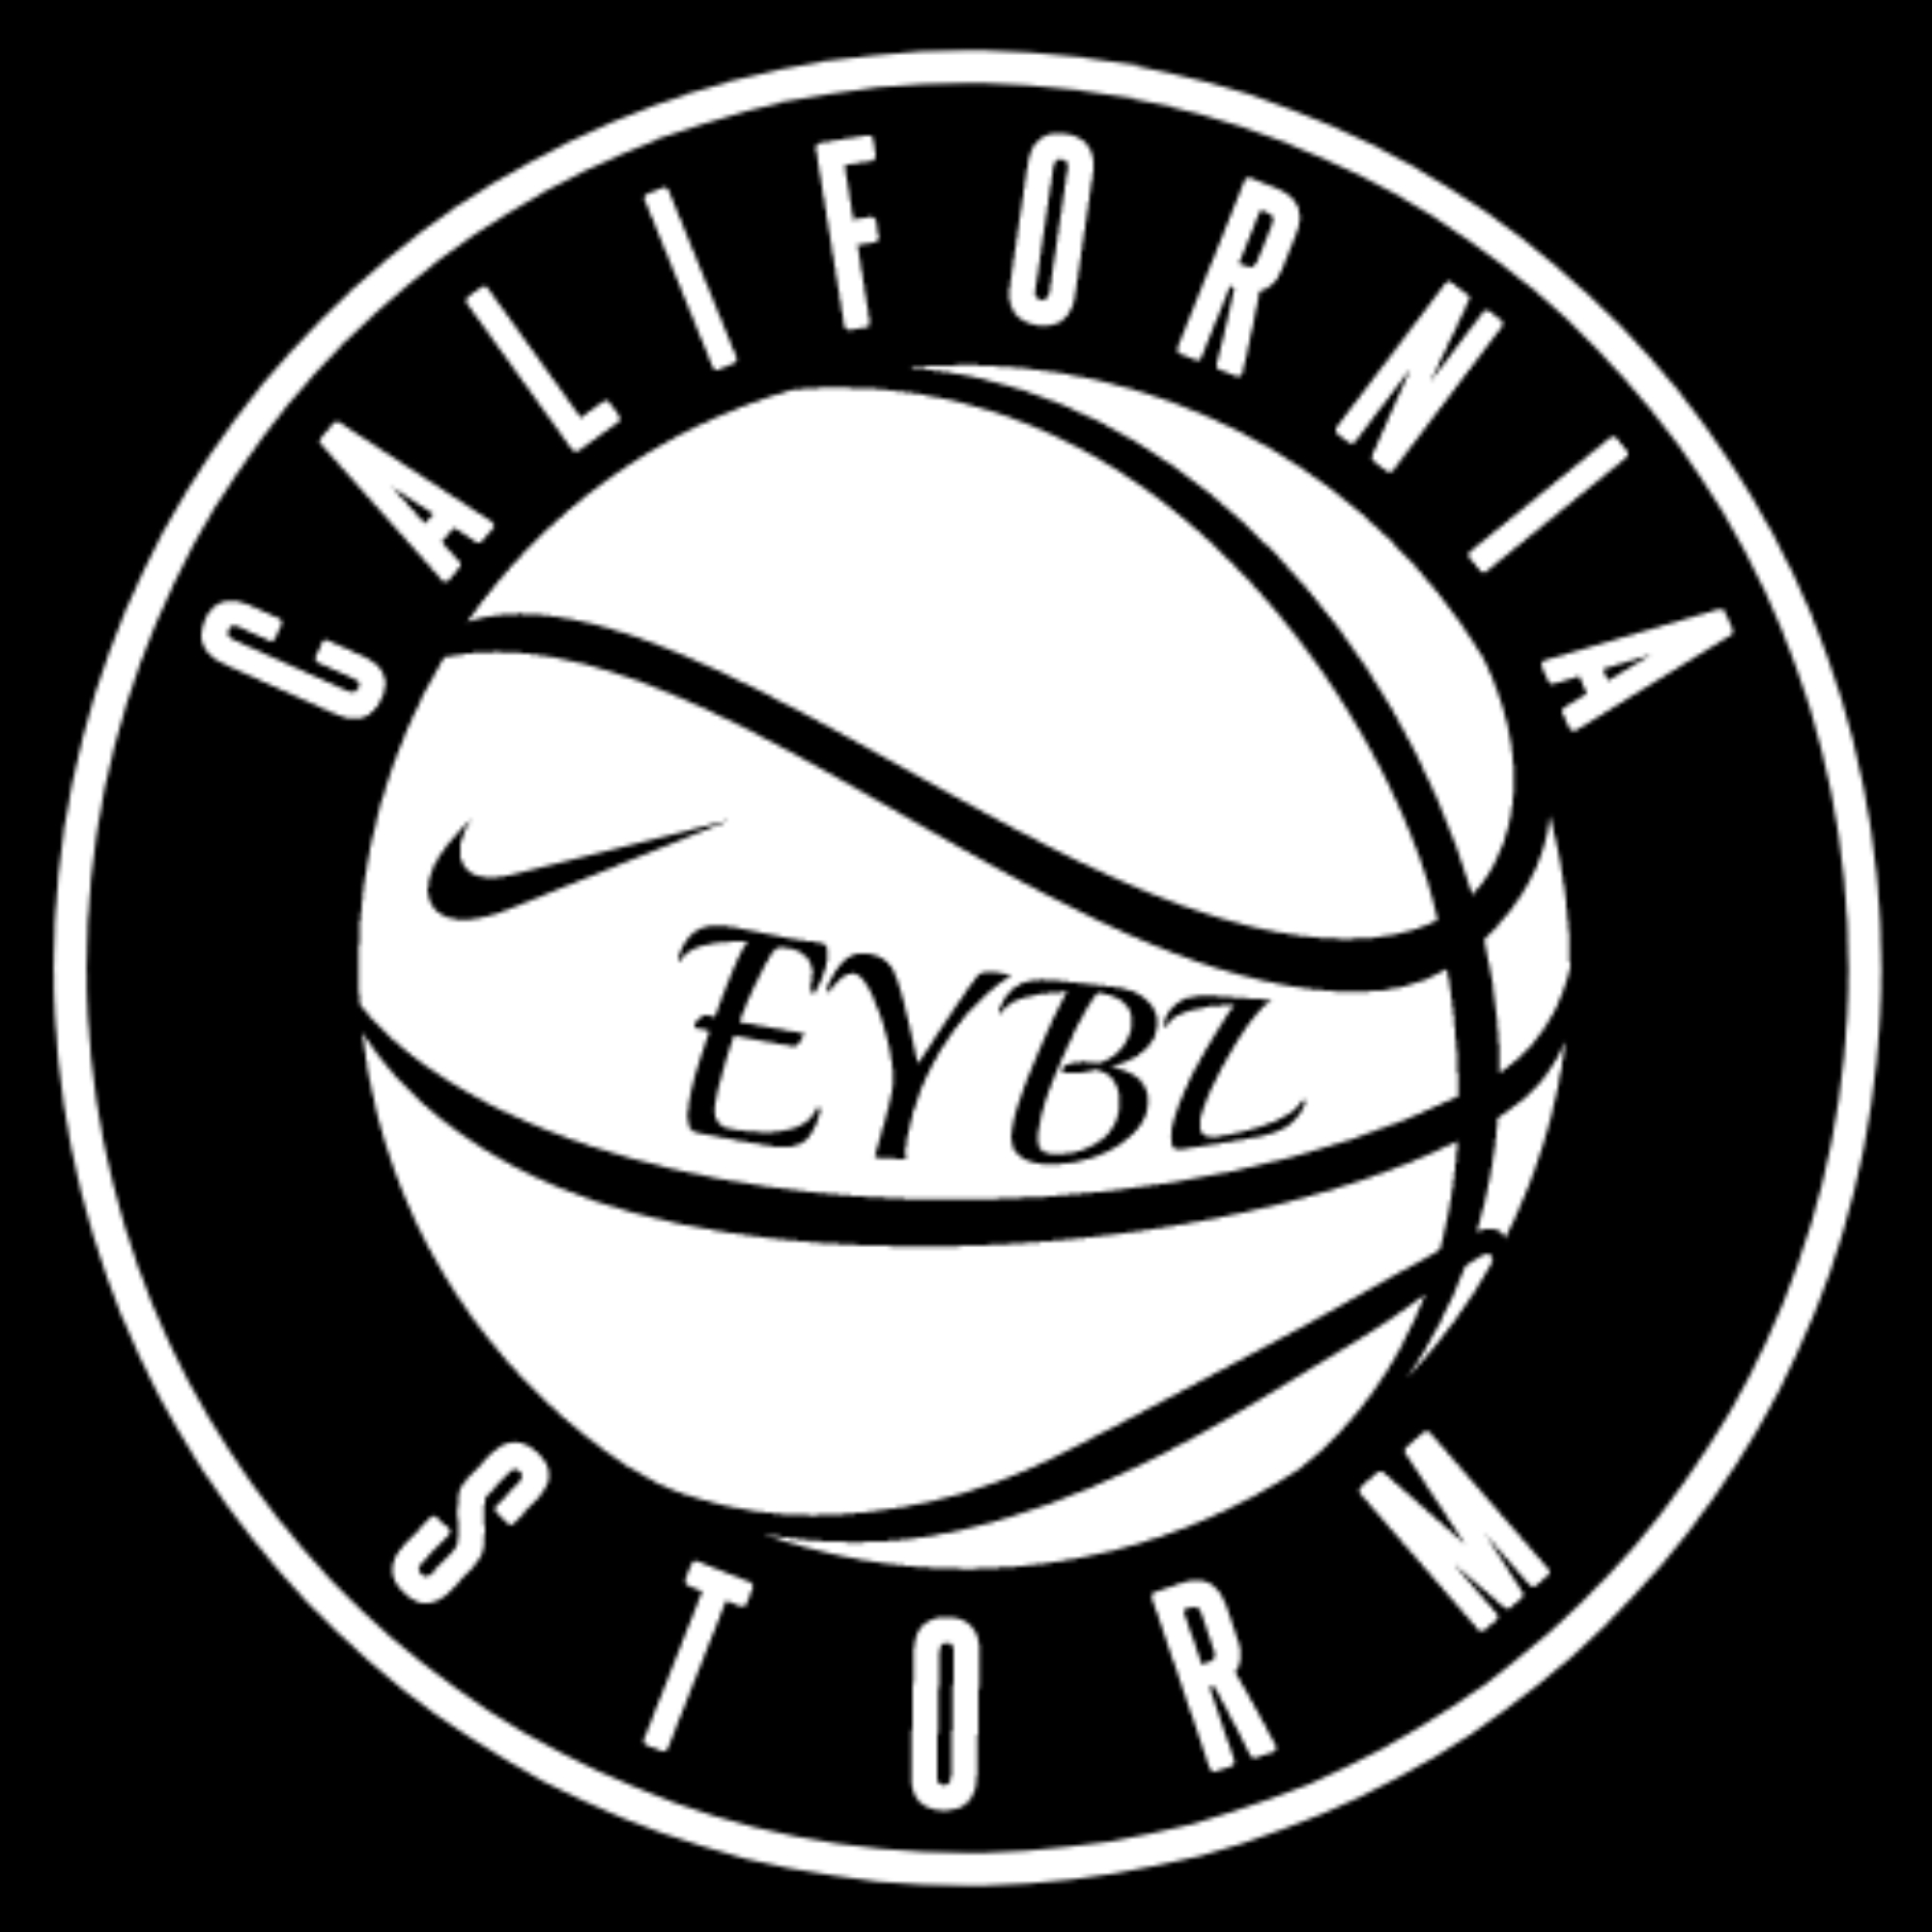 The official logo of Cal Storm Nike San Diego